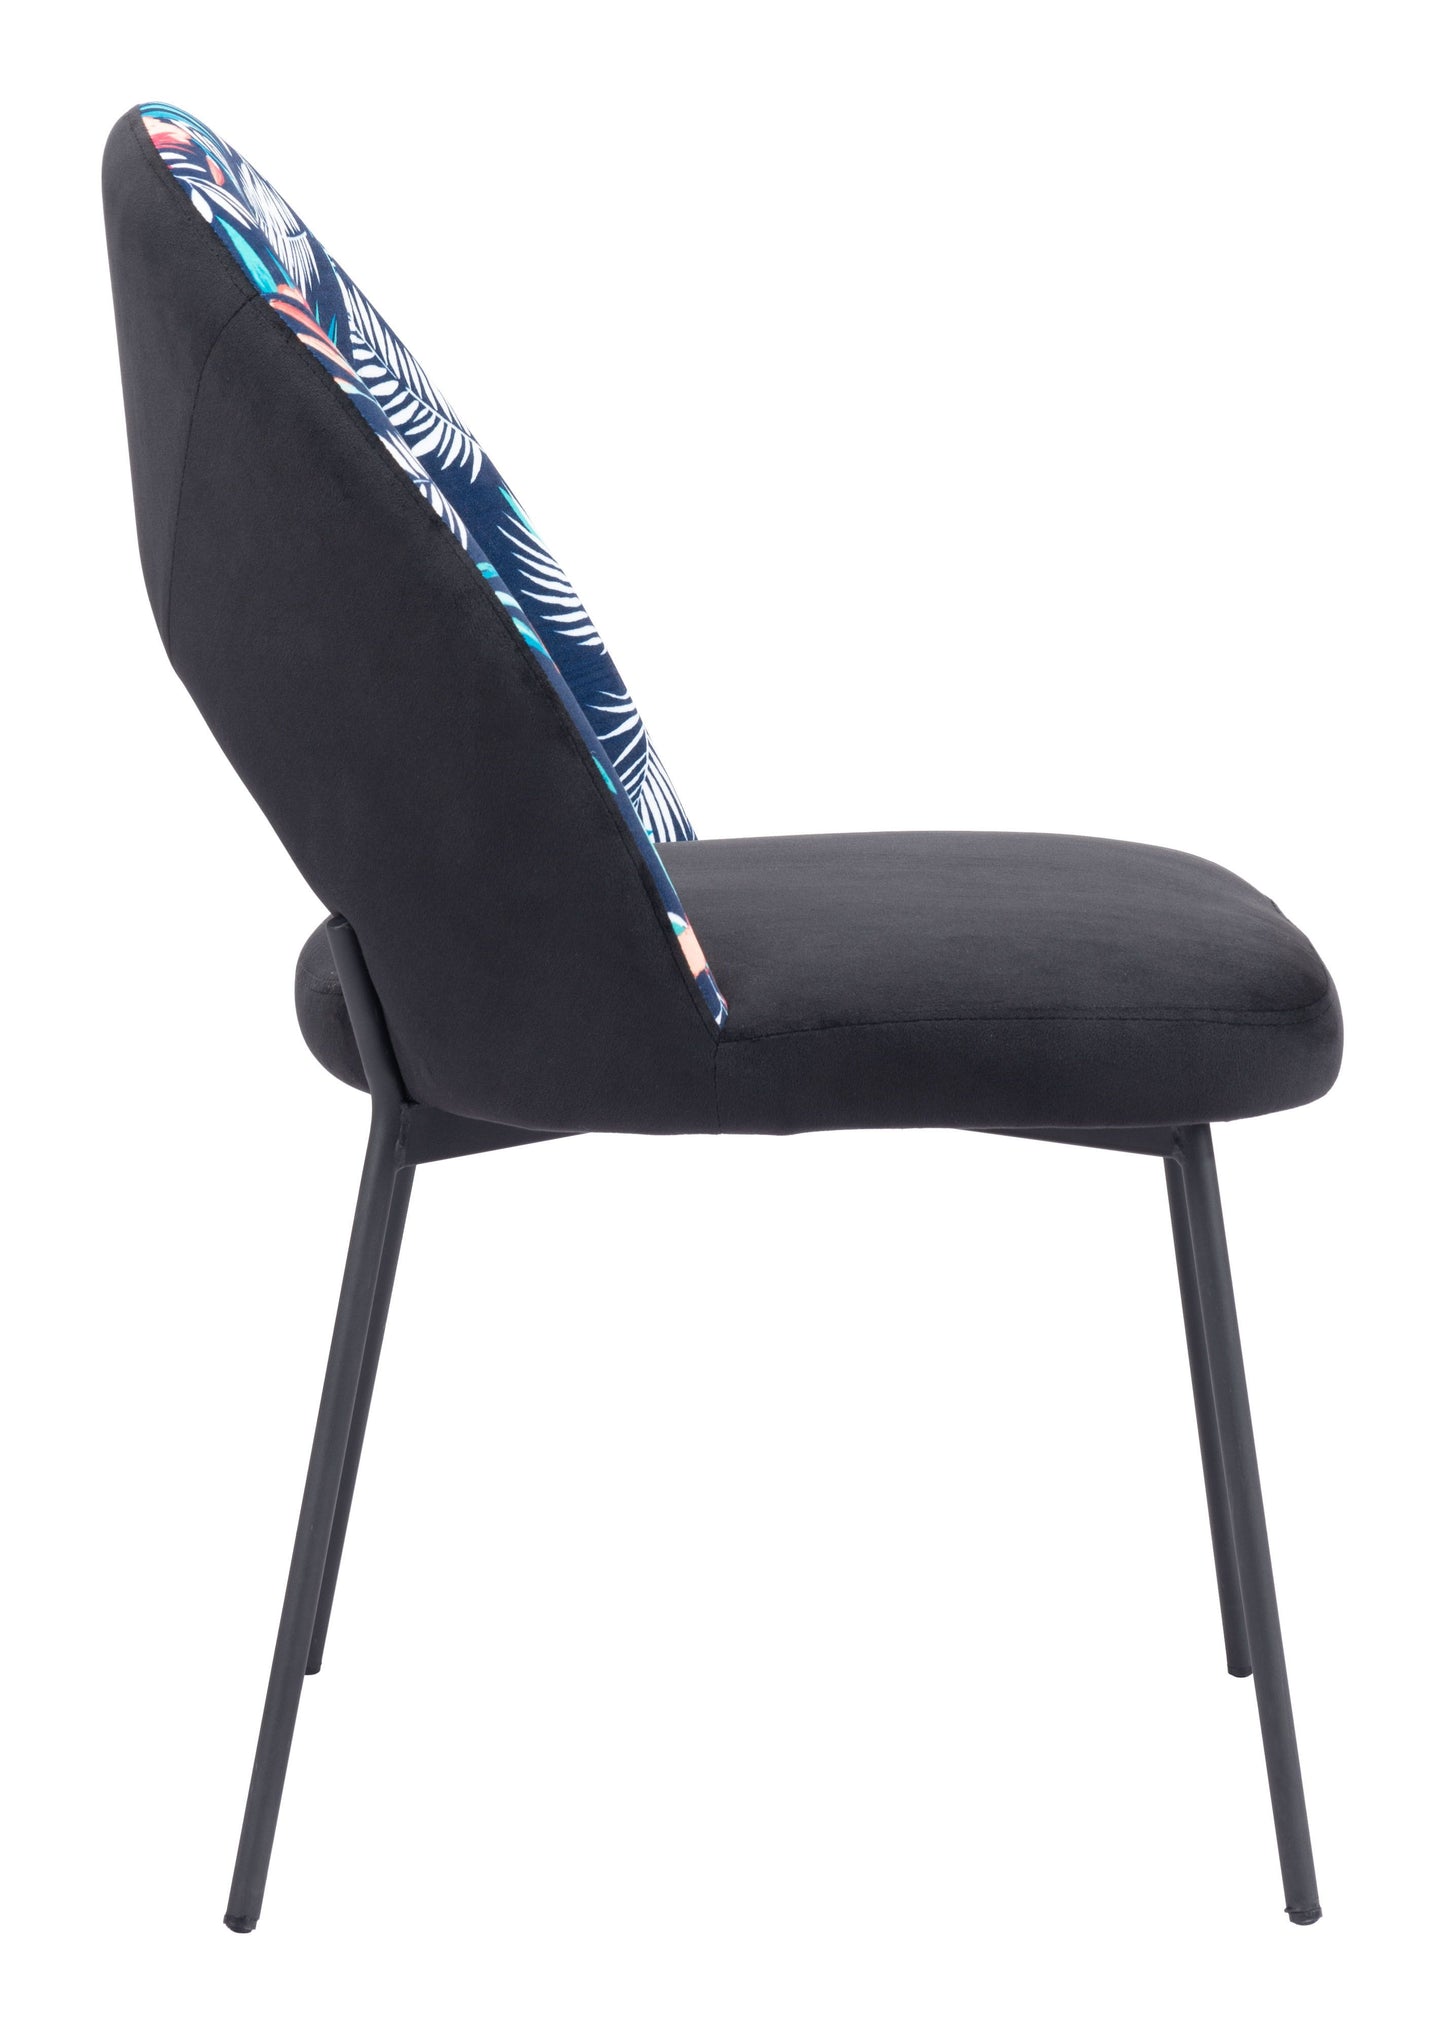 Merion Dining Chair Multicolor Print & Black